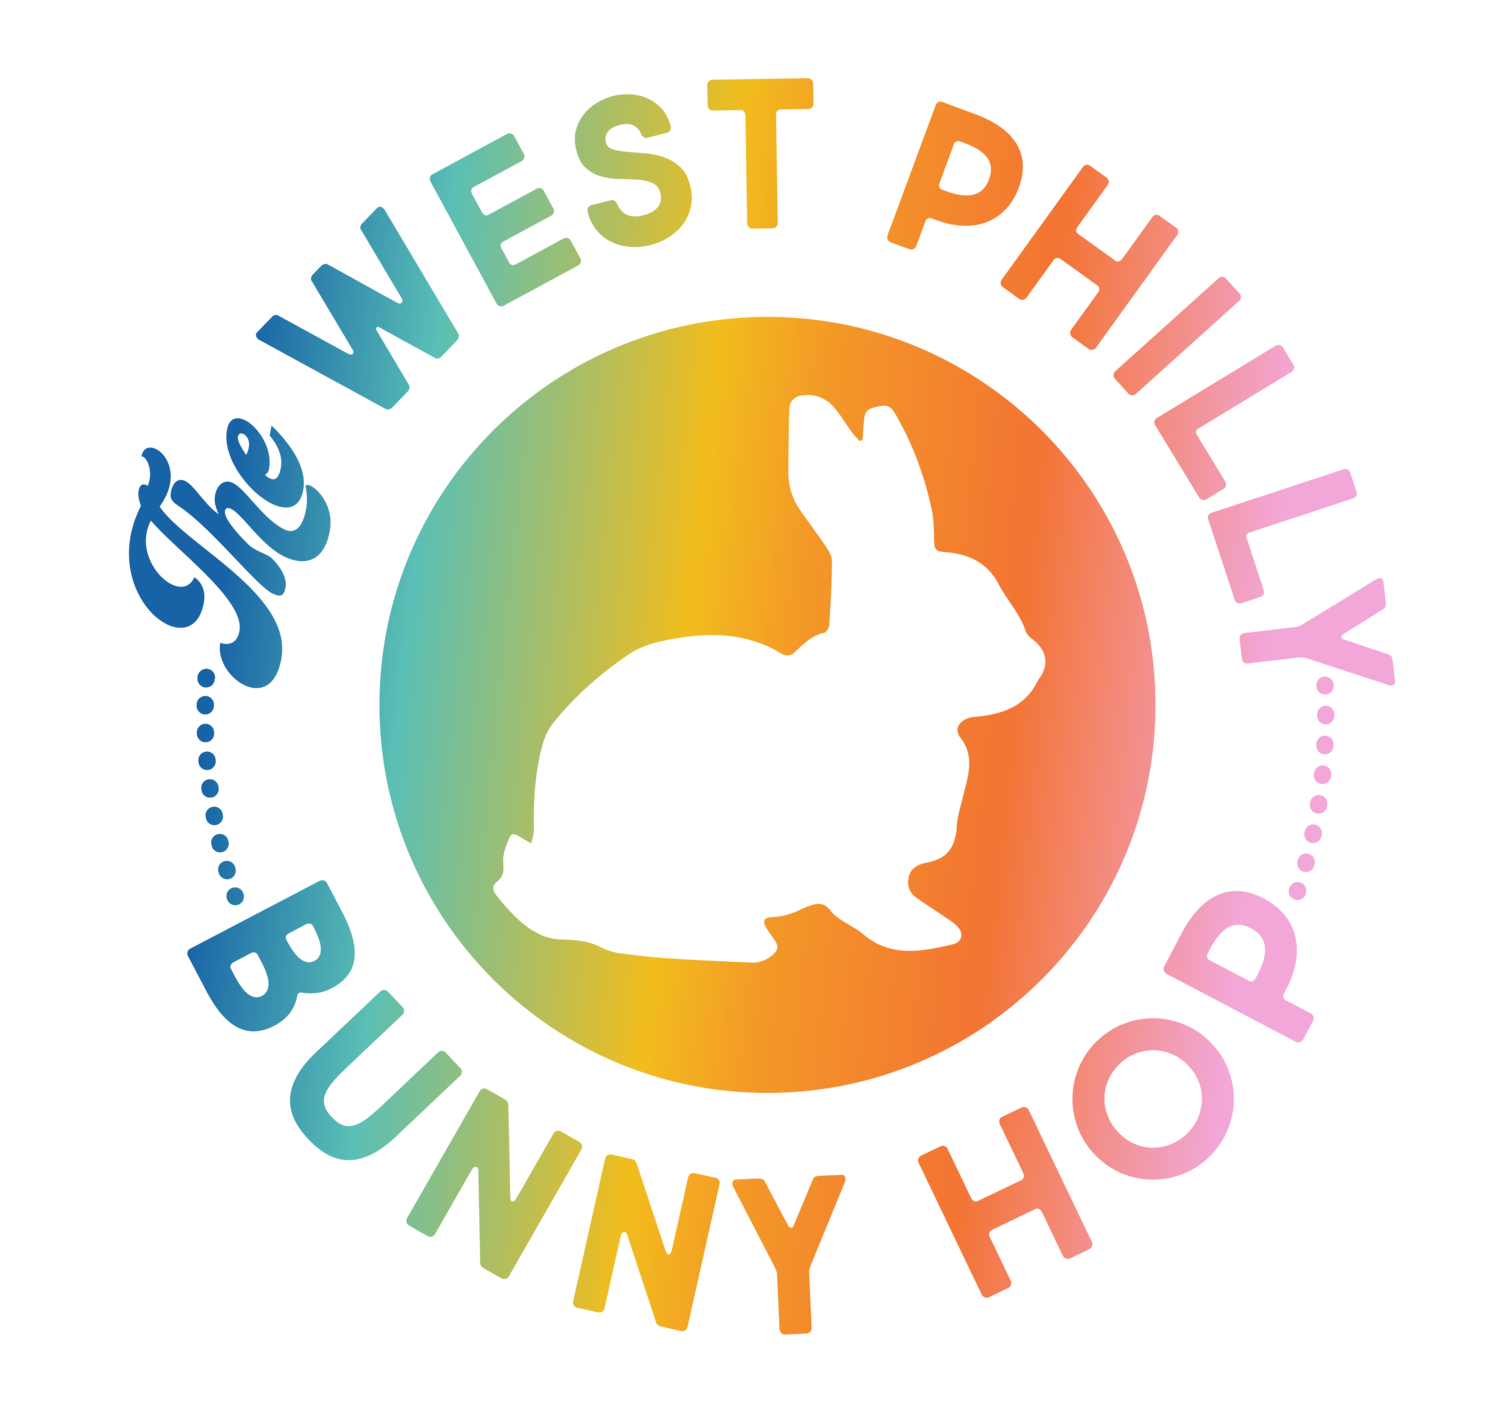 The West Philly Bunny Hop